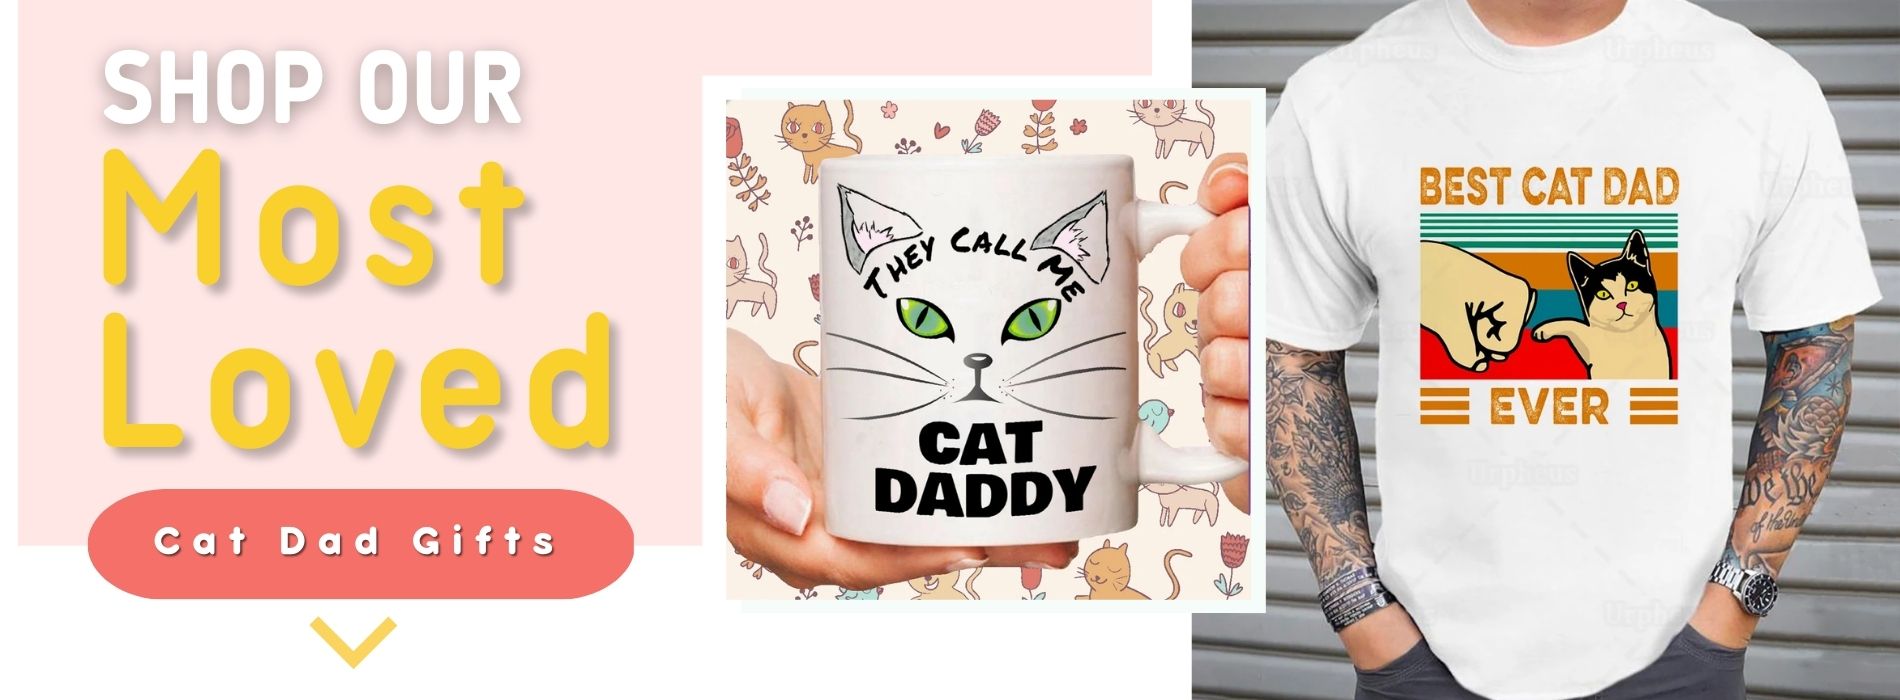 cat-dad-gifts